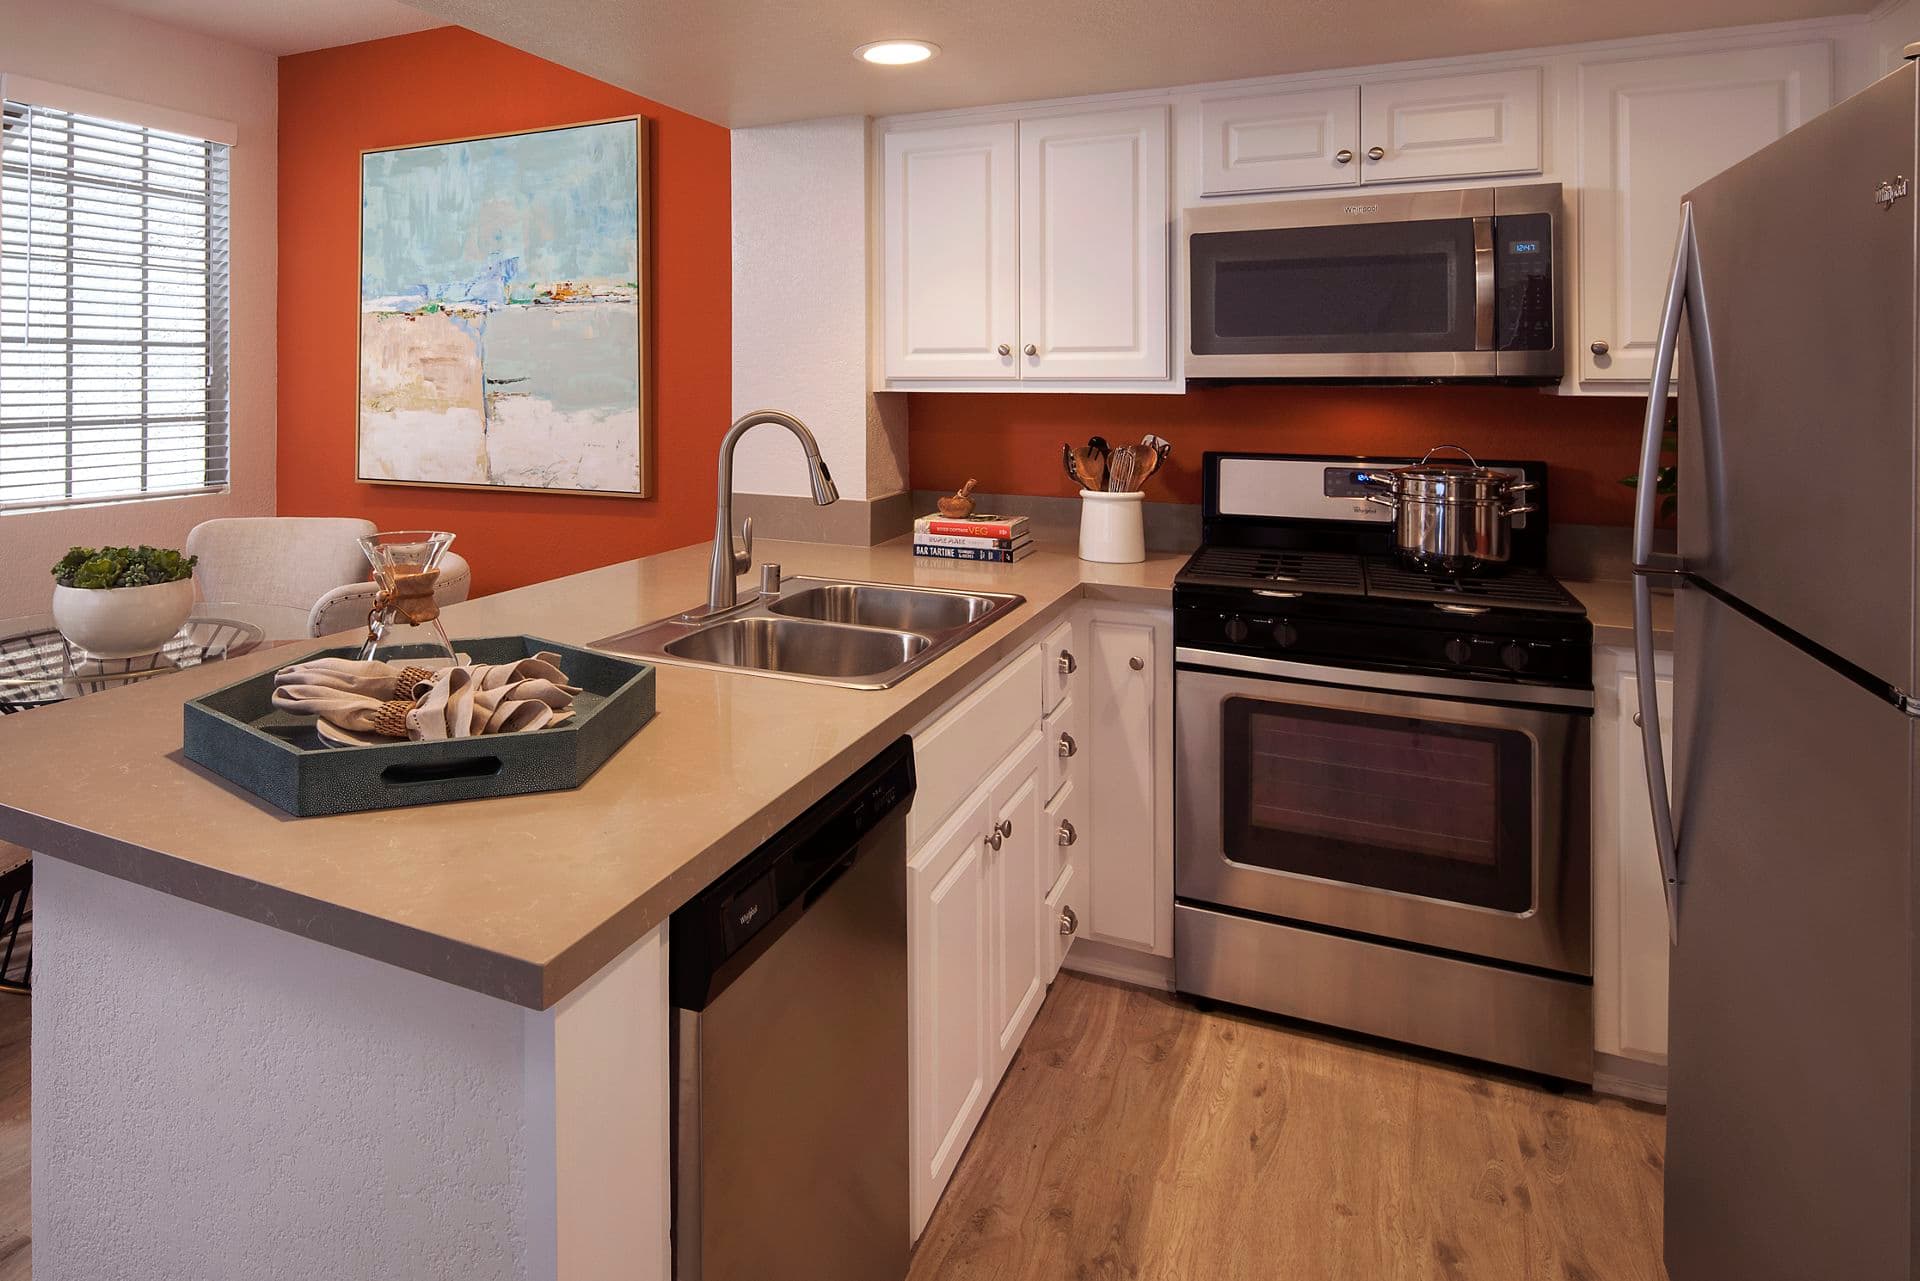 Interior view of kitchen at Aliso Town Center Apartment Homes in Aliso Viejo, CA.